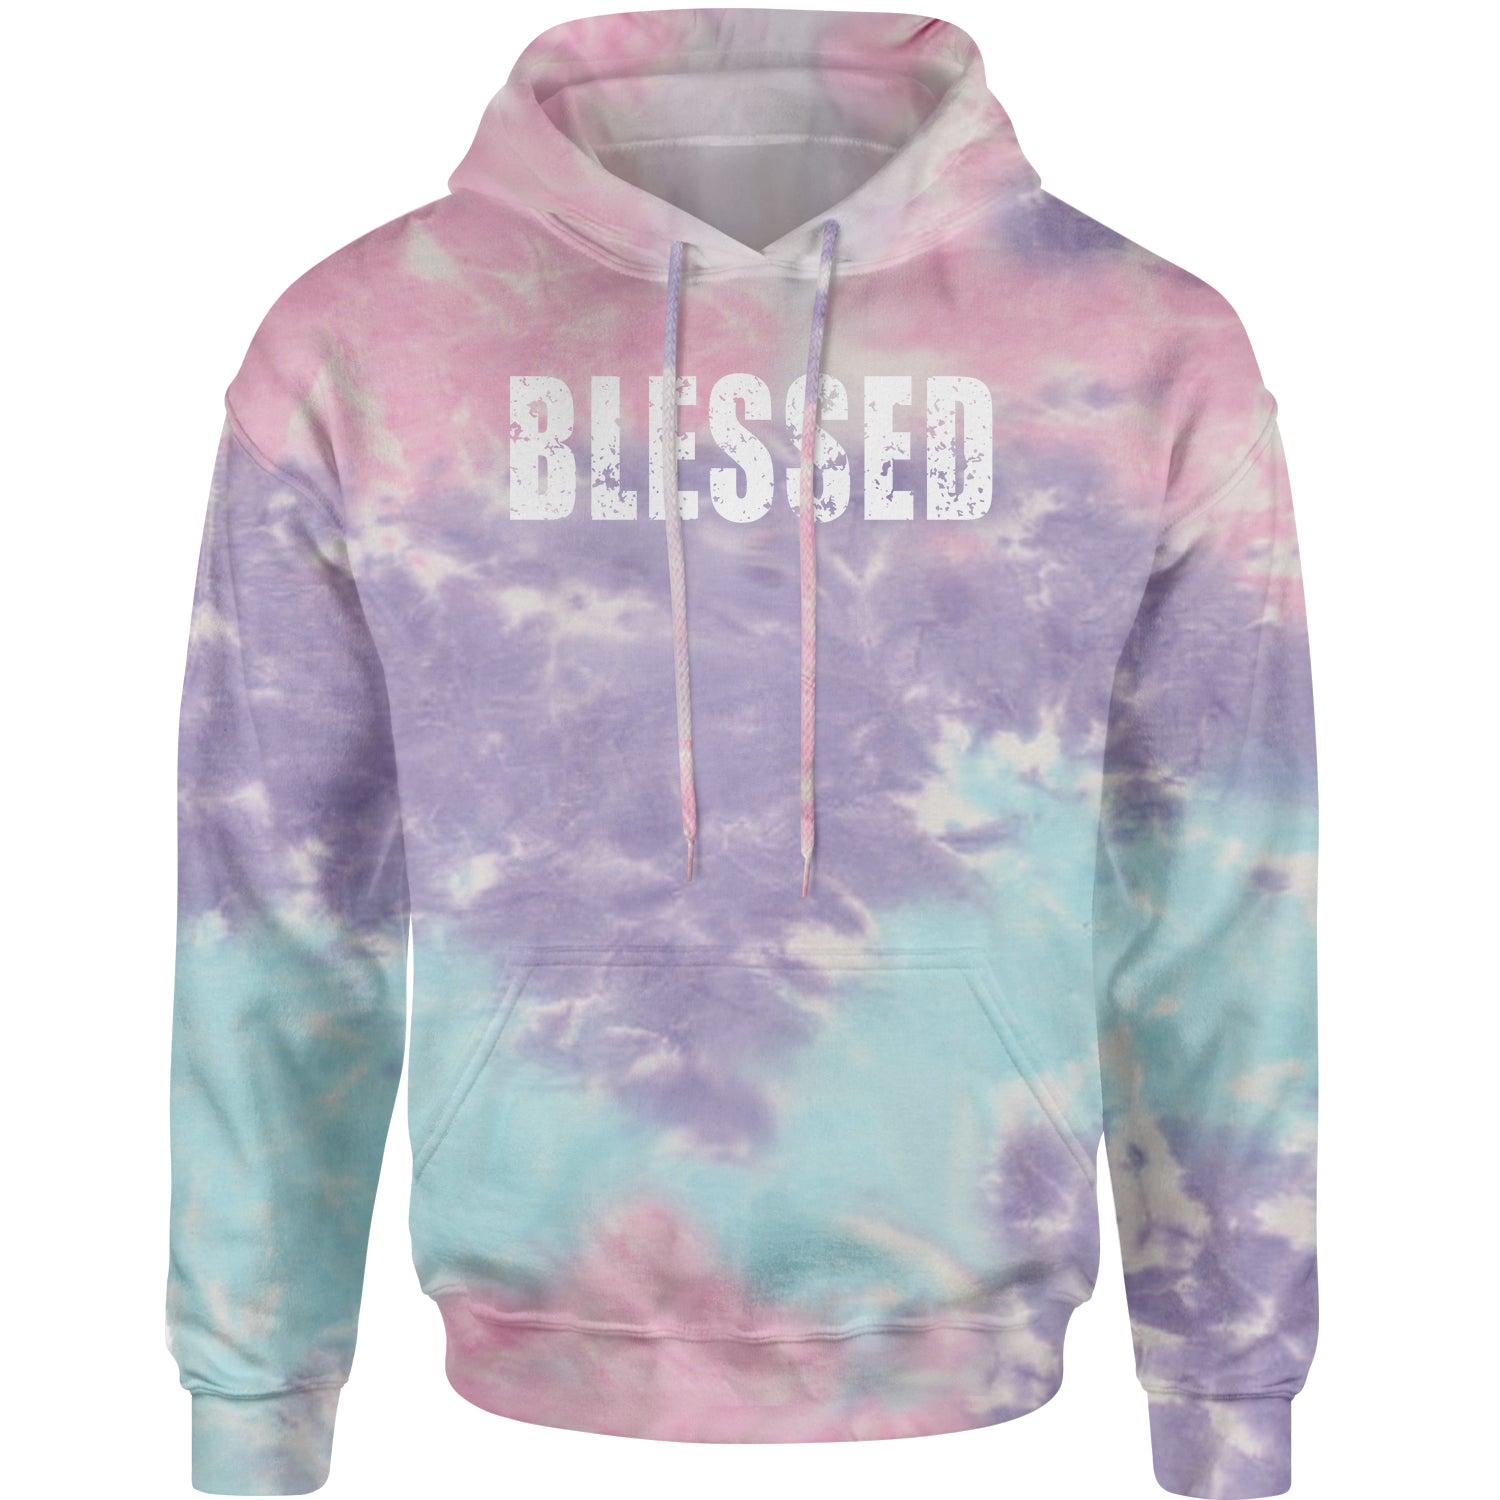 Blessed Religious Grateful Thankful Adult Hoodie Sweatshirt #expressiontees by Expression Tees